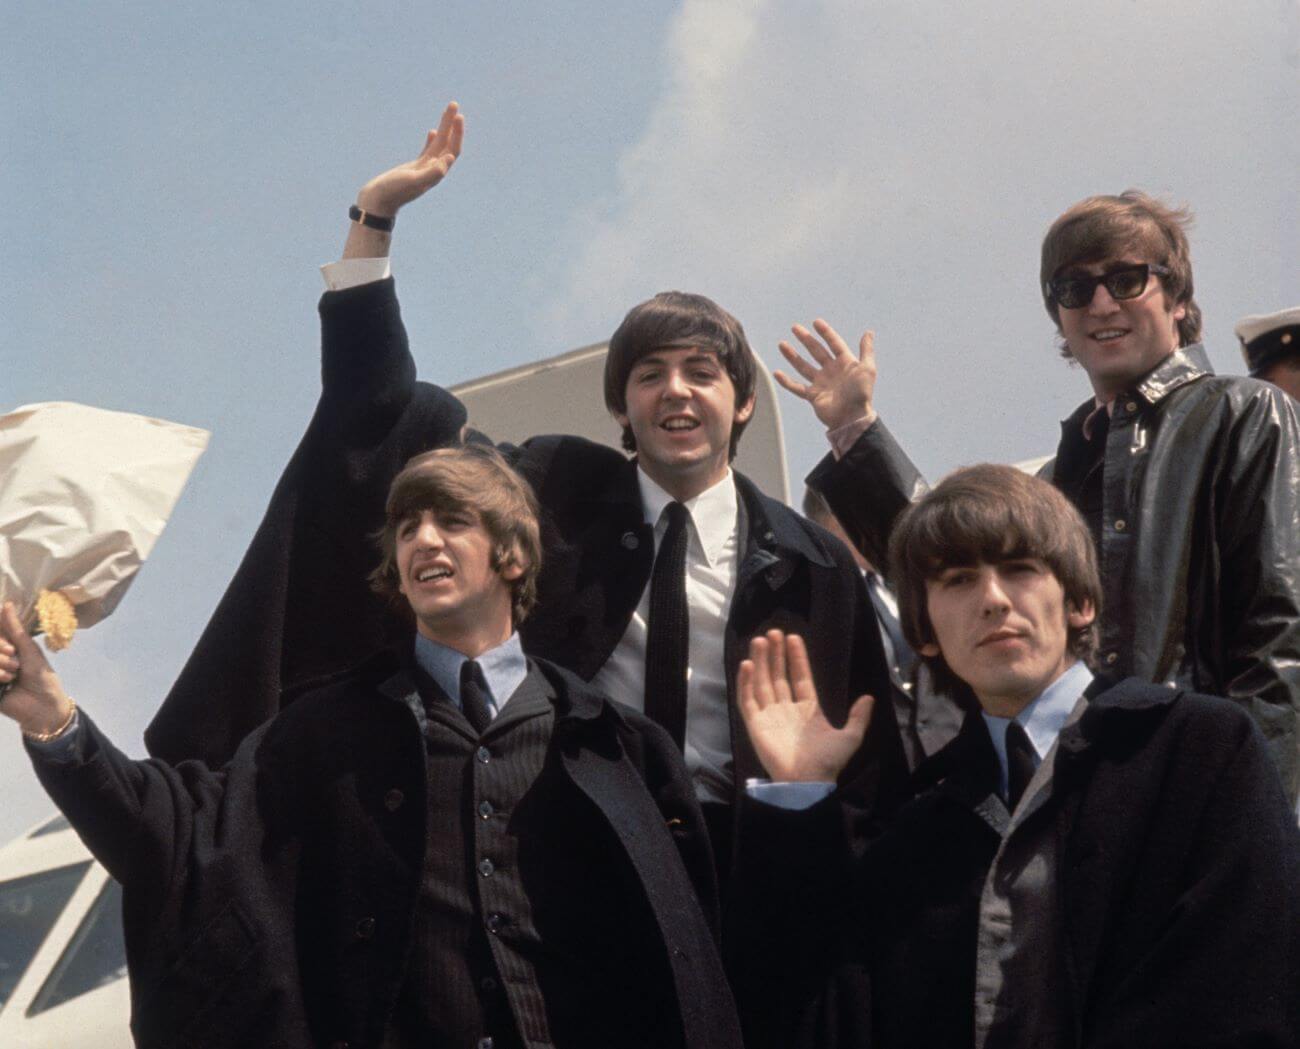 Ringo Starr, Paul McCartney, George Harrison, and John Lennon of The Beatles wave from the door of an airplane.